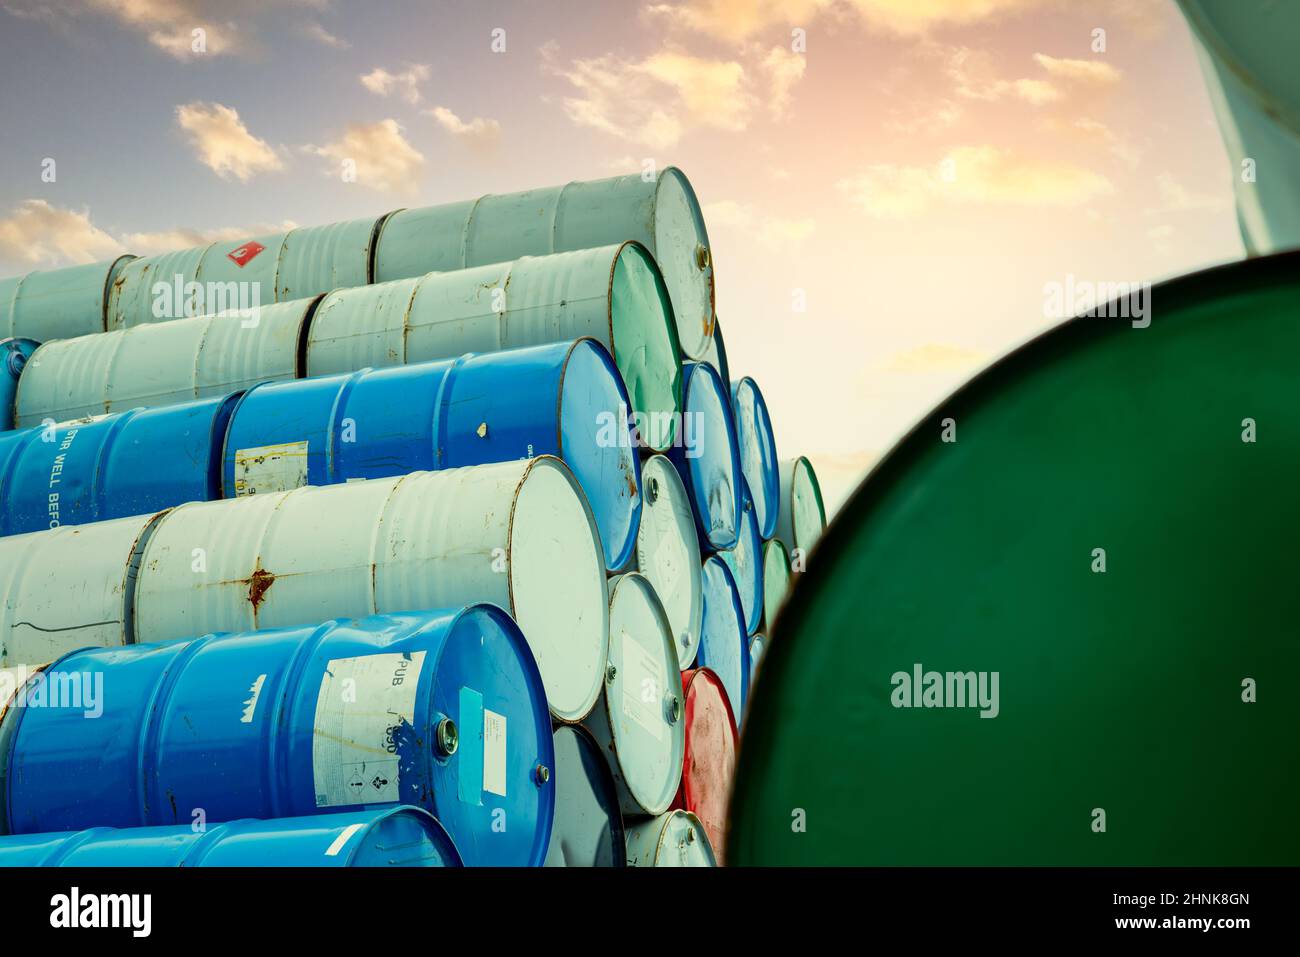 https://c8.alamy.com/comp/2HNK8GN/old-chemical-barrels-stack-red-green-and-blue-chemical-drum-steel-tank-of-flammable-liquid-hazard-chemical-barrel-industrial-waste-empty-chemical-barrels-at-the-factory-warehouse-hazard-waste-2HNK8GN.jpg